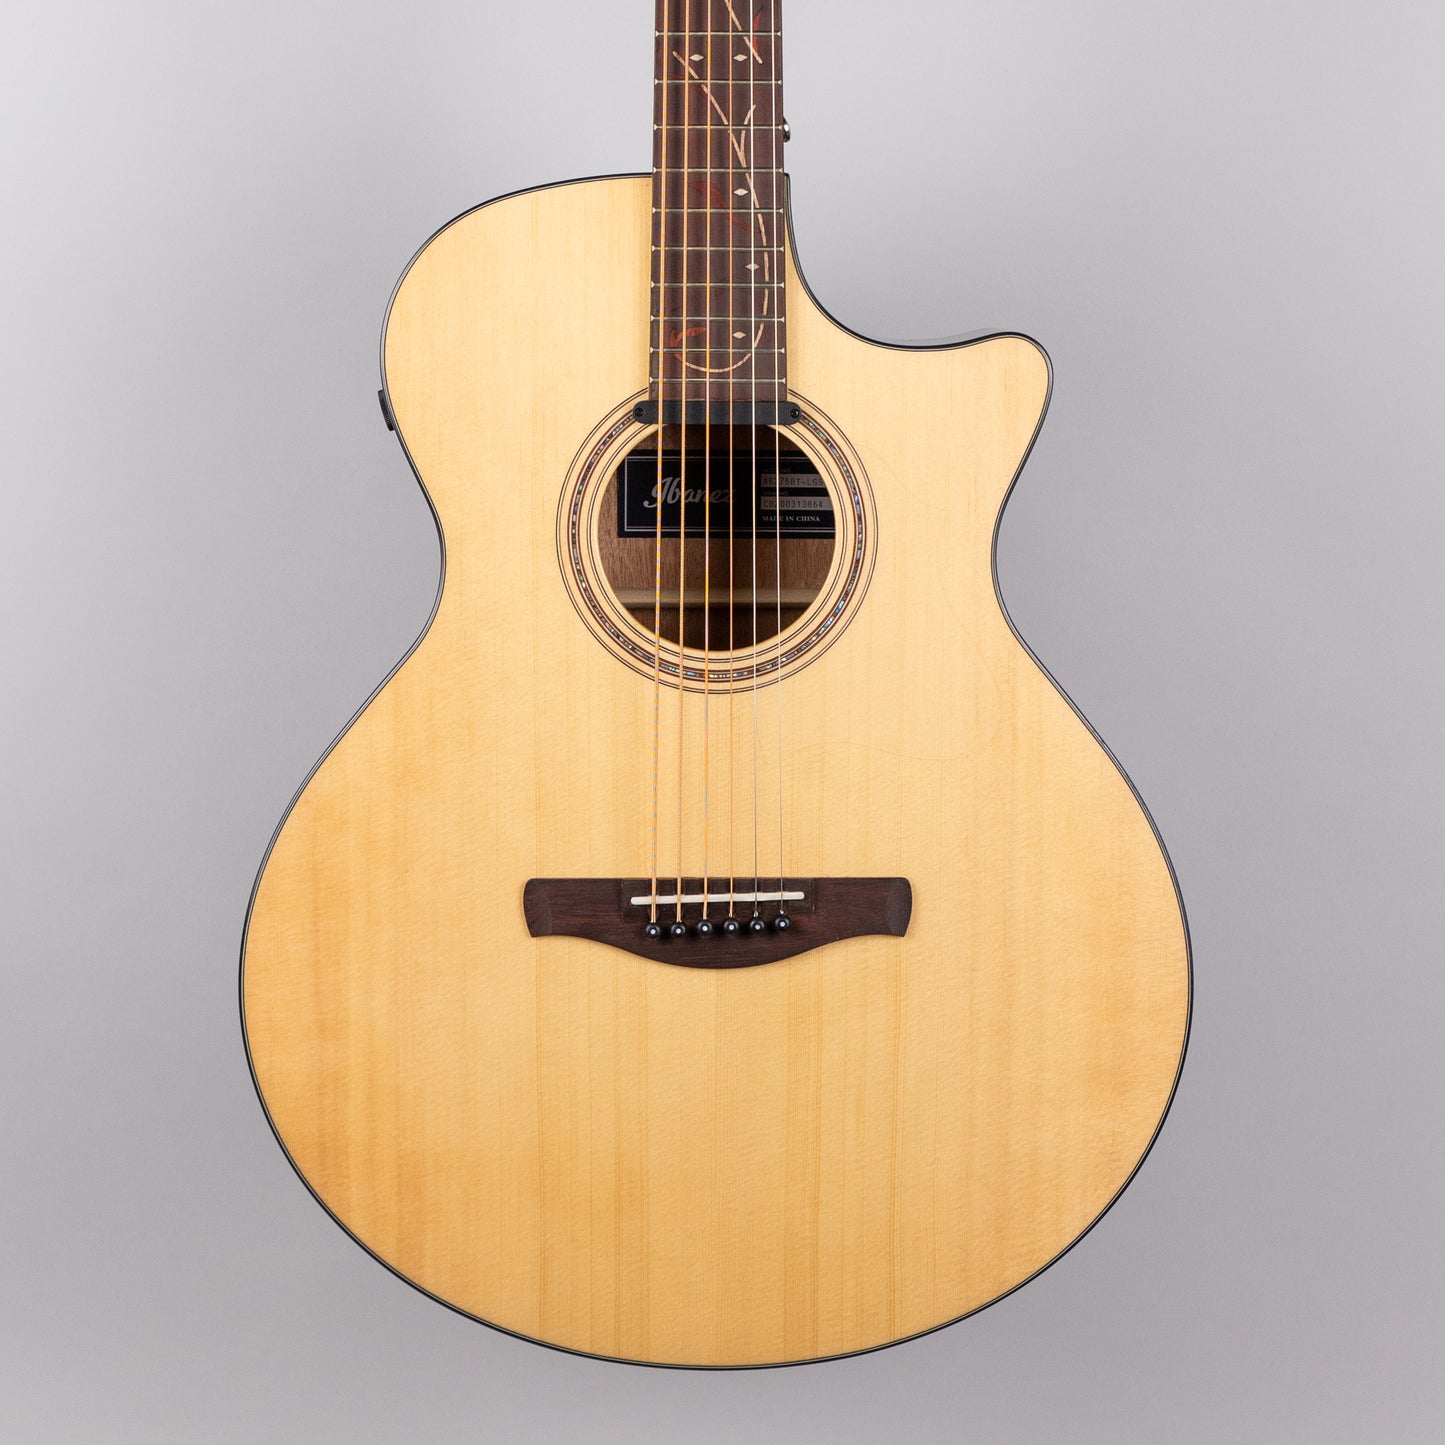 Ibanez AE275BT-LGS Baritone Acoustic/Electric Guitar in Natural Low Gloss